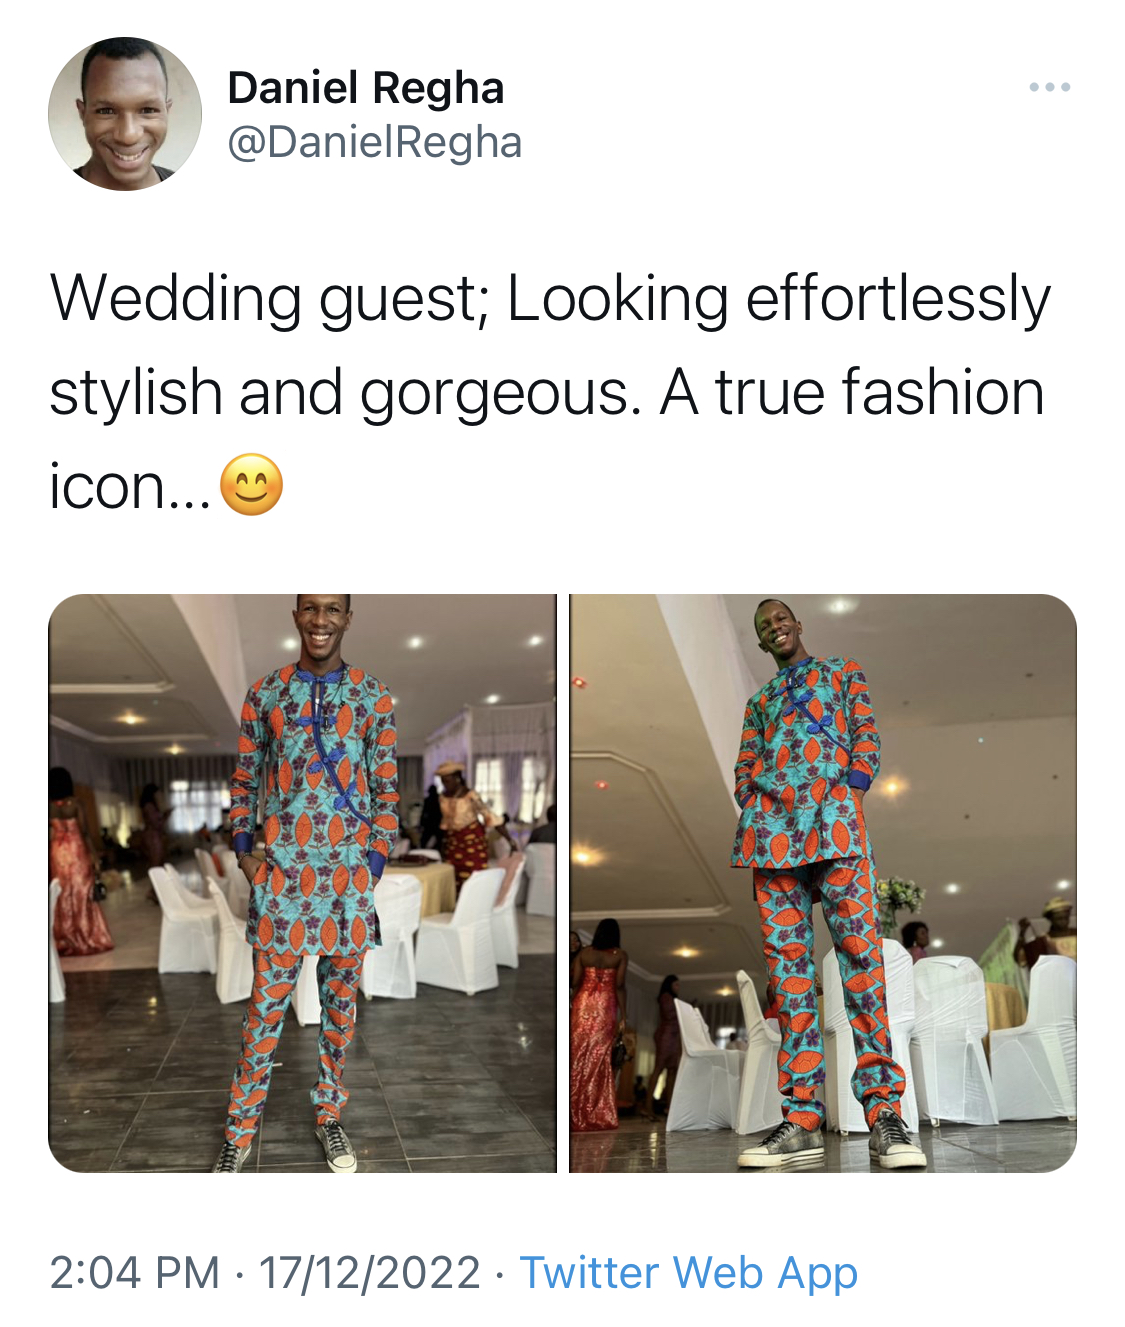 You look like a village champion - Nigerians blast Twitter critic Daniel Regha over his outfit [photos]